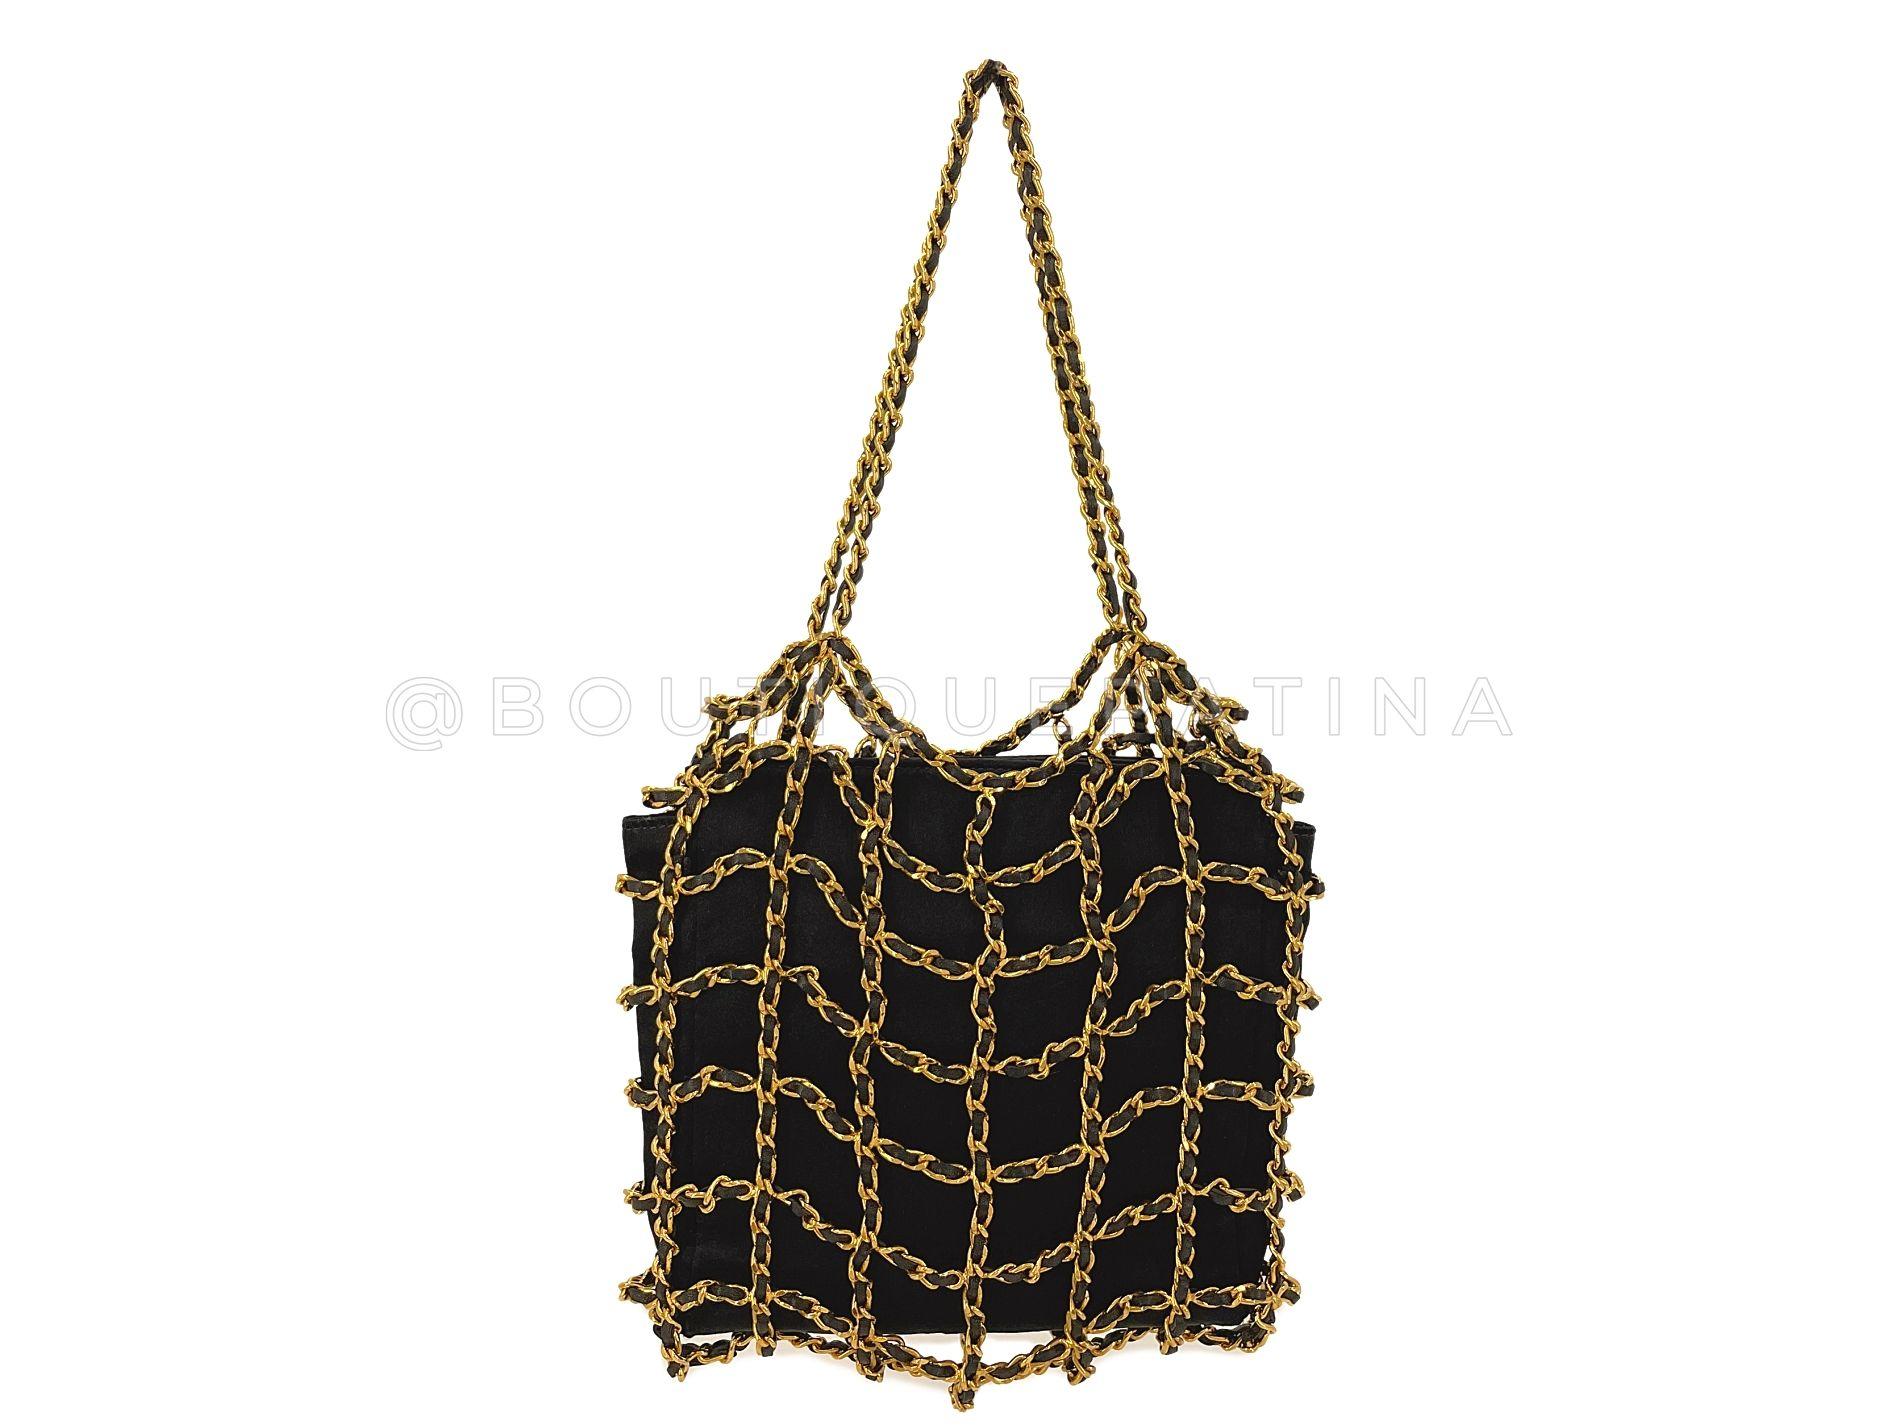 Rare Chanel 1994 Miniature Caged Silk Evening Bag 24k GHW 68049 In Excellent Condition For Sale In Costa Mesa, CA